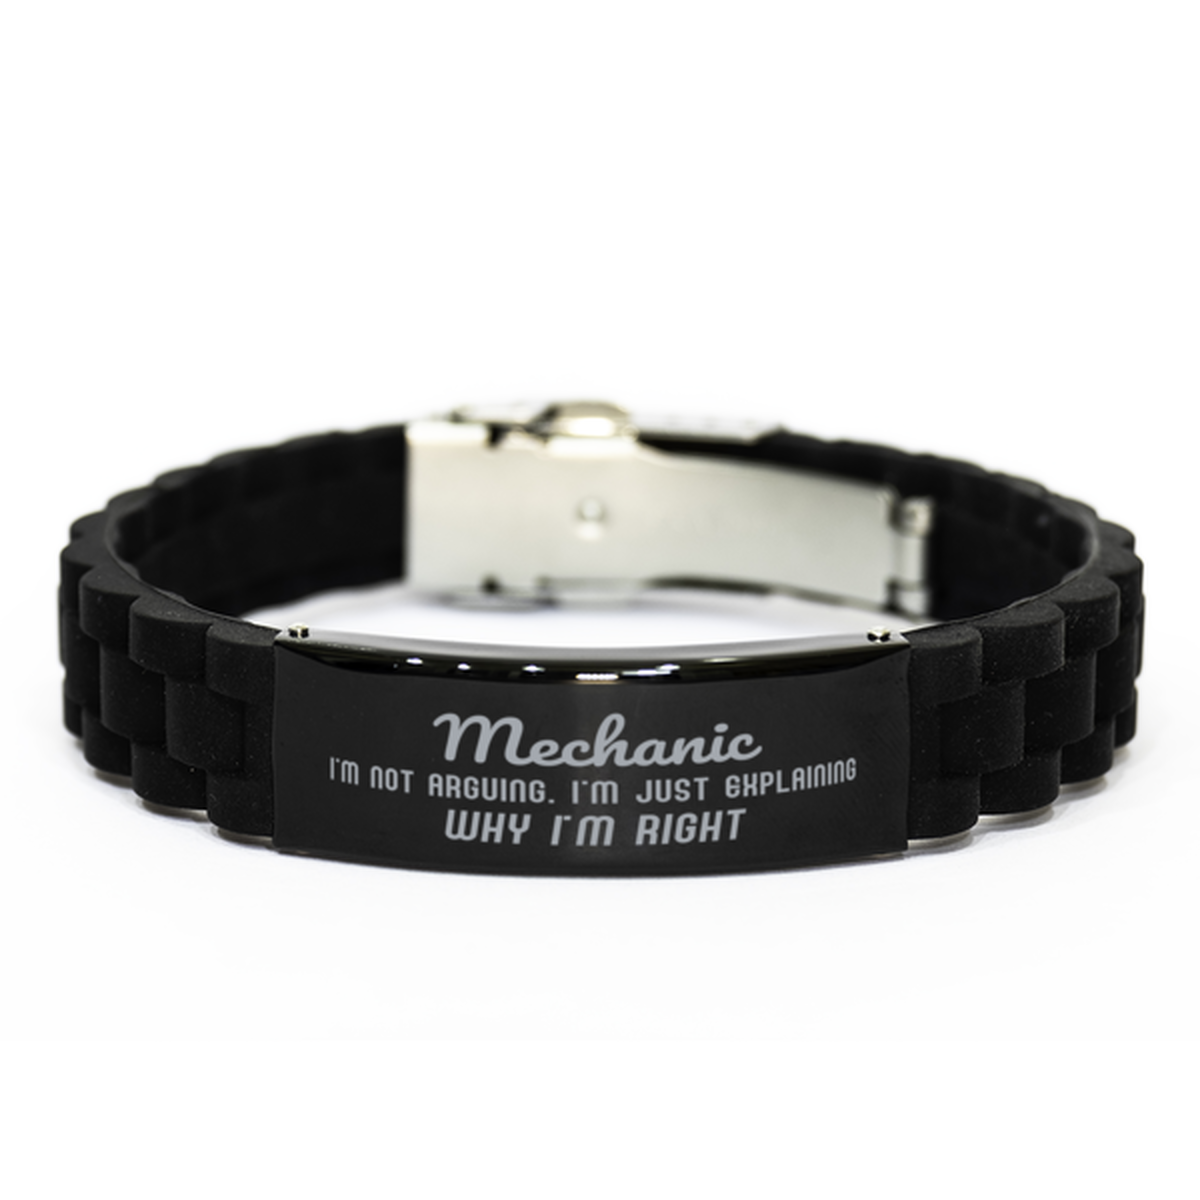 Mechanic I'm not Arguing. I'm Just Explaining Why I'm RIGHT Black Glidelock Clasp Bracelet, Funny Saying Quote Mechanic Gifts For Mechanic Graduation Birthday Christmas Gifts for Men Women Coworker